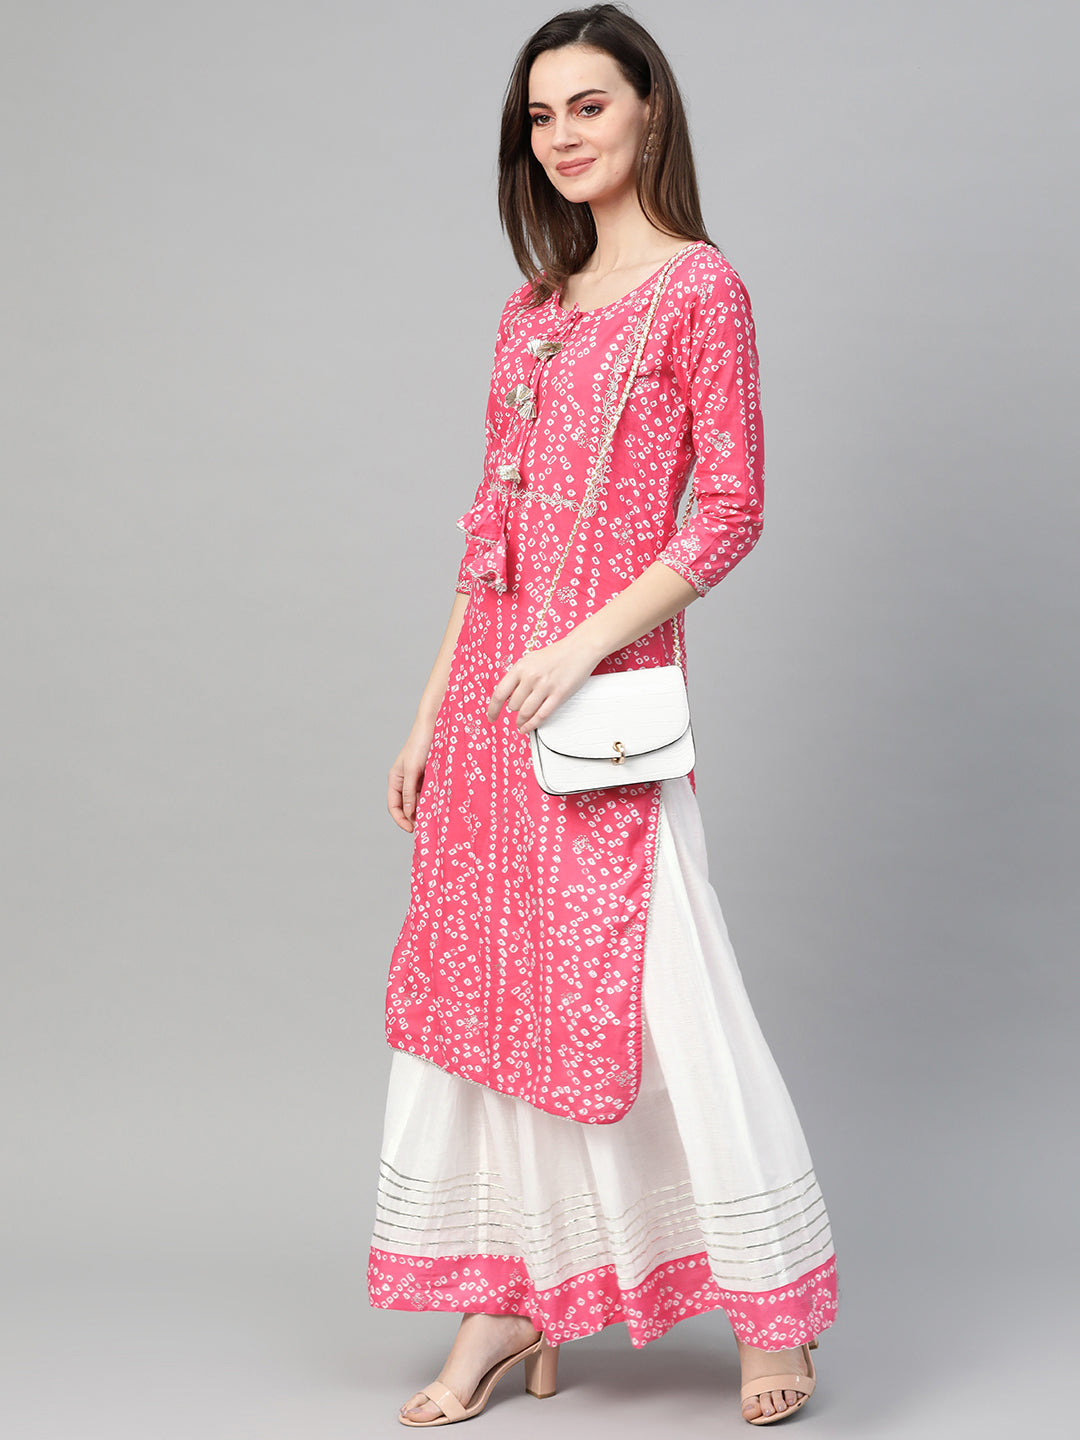 Beige and Pink Color Party Wear Kurti with Skirt Set  fashionnaari